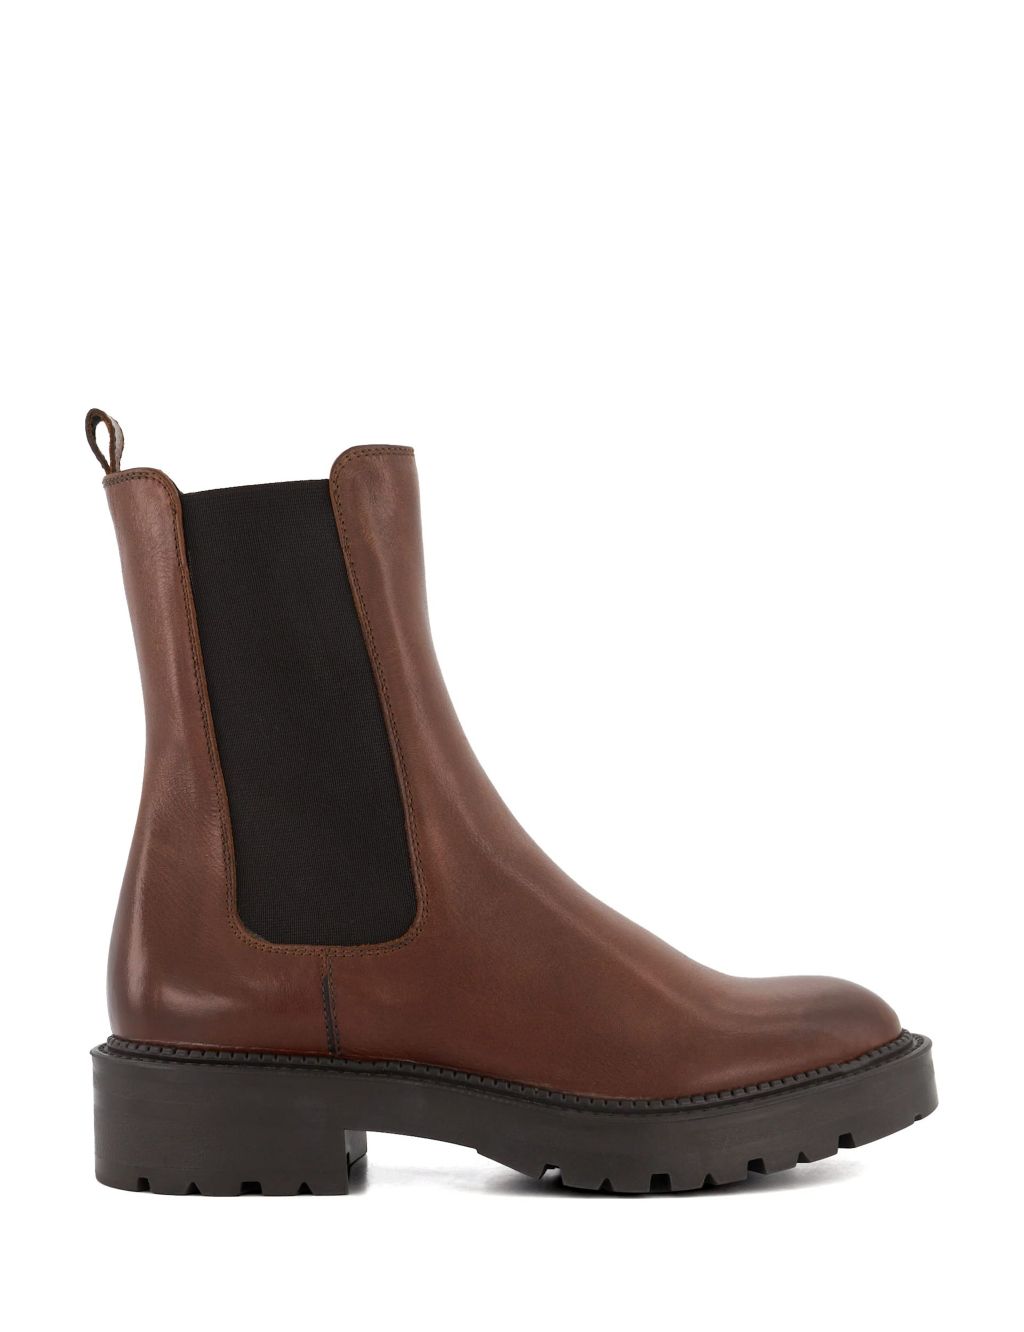 Leather Chunky Chelsea Ankle Boot image 1